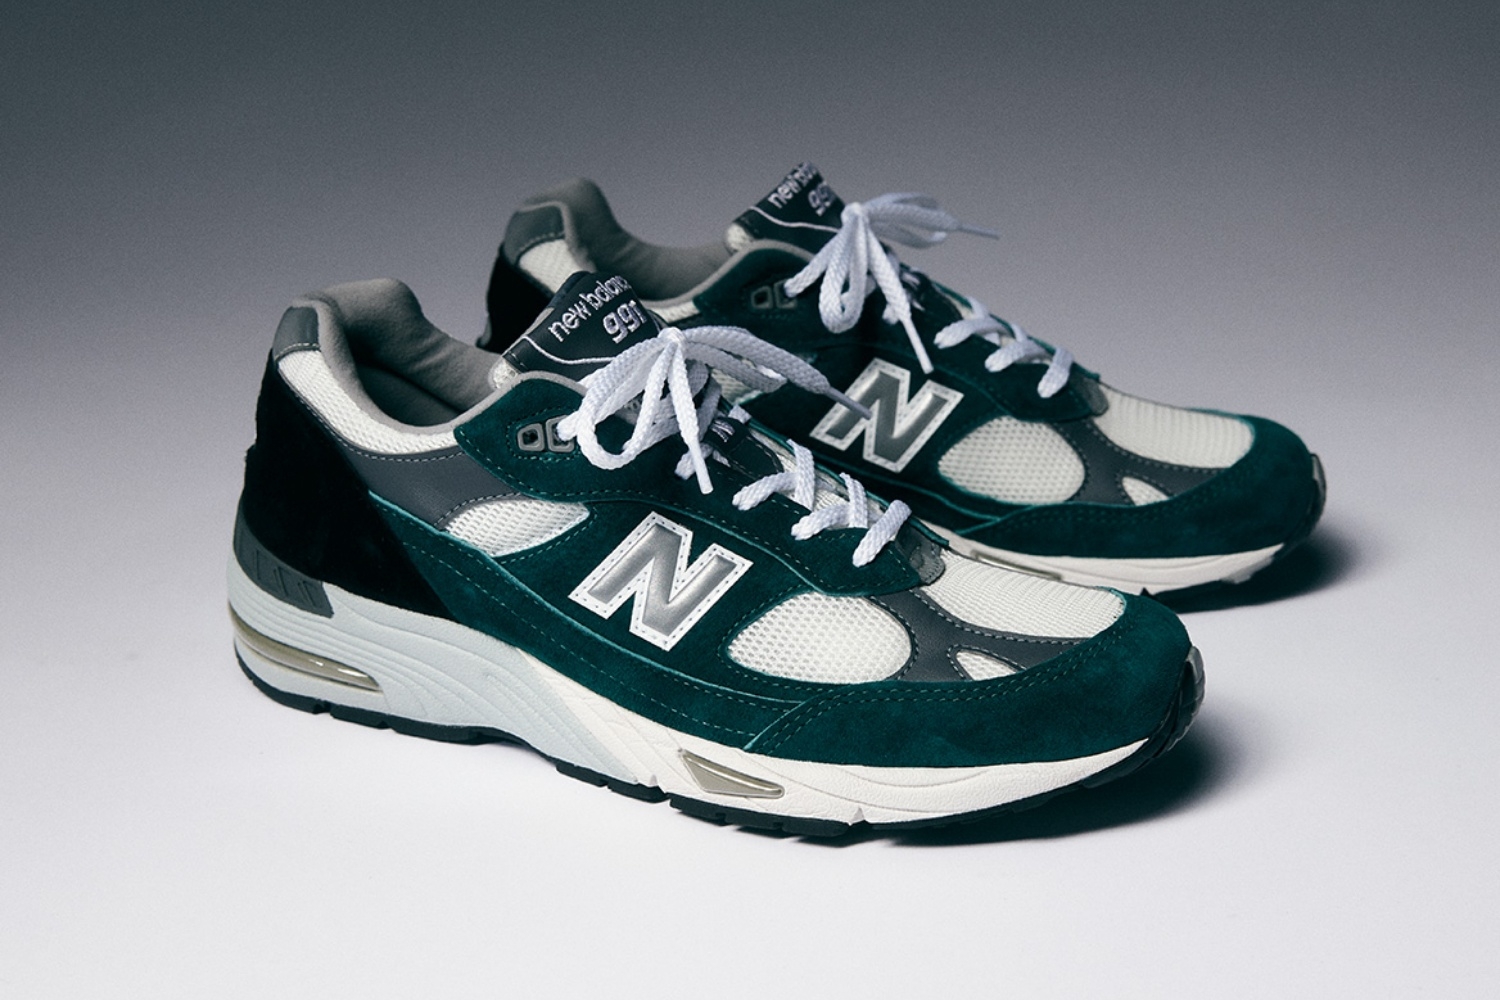 Shop new items from the 'Made in UK' collection at New Balance